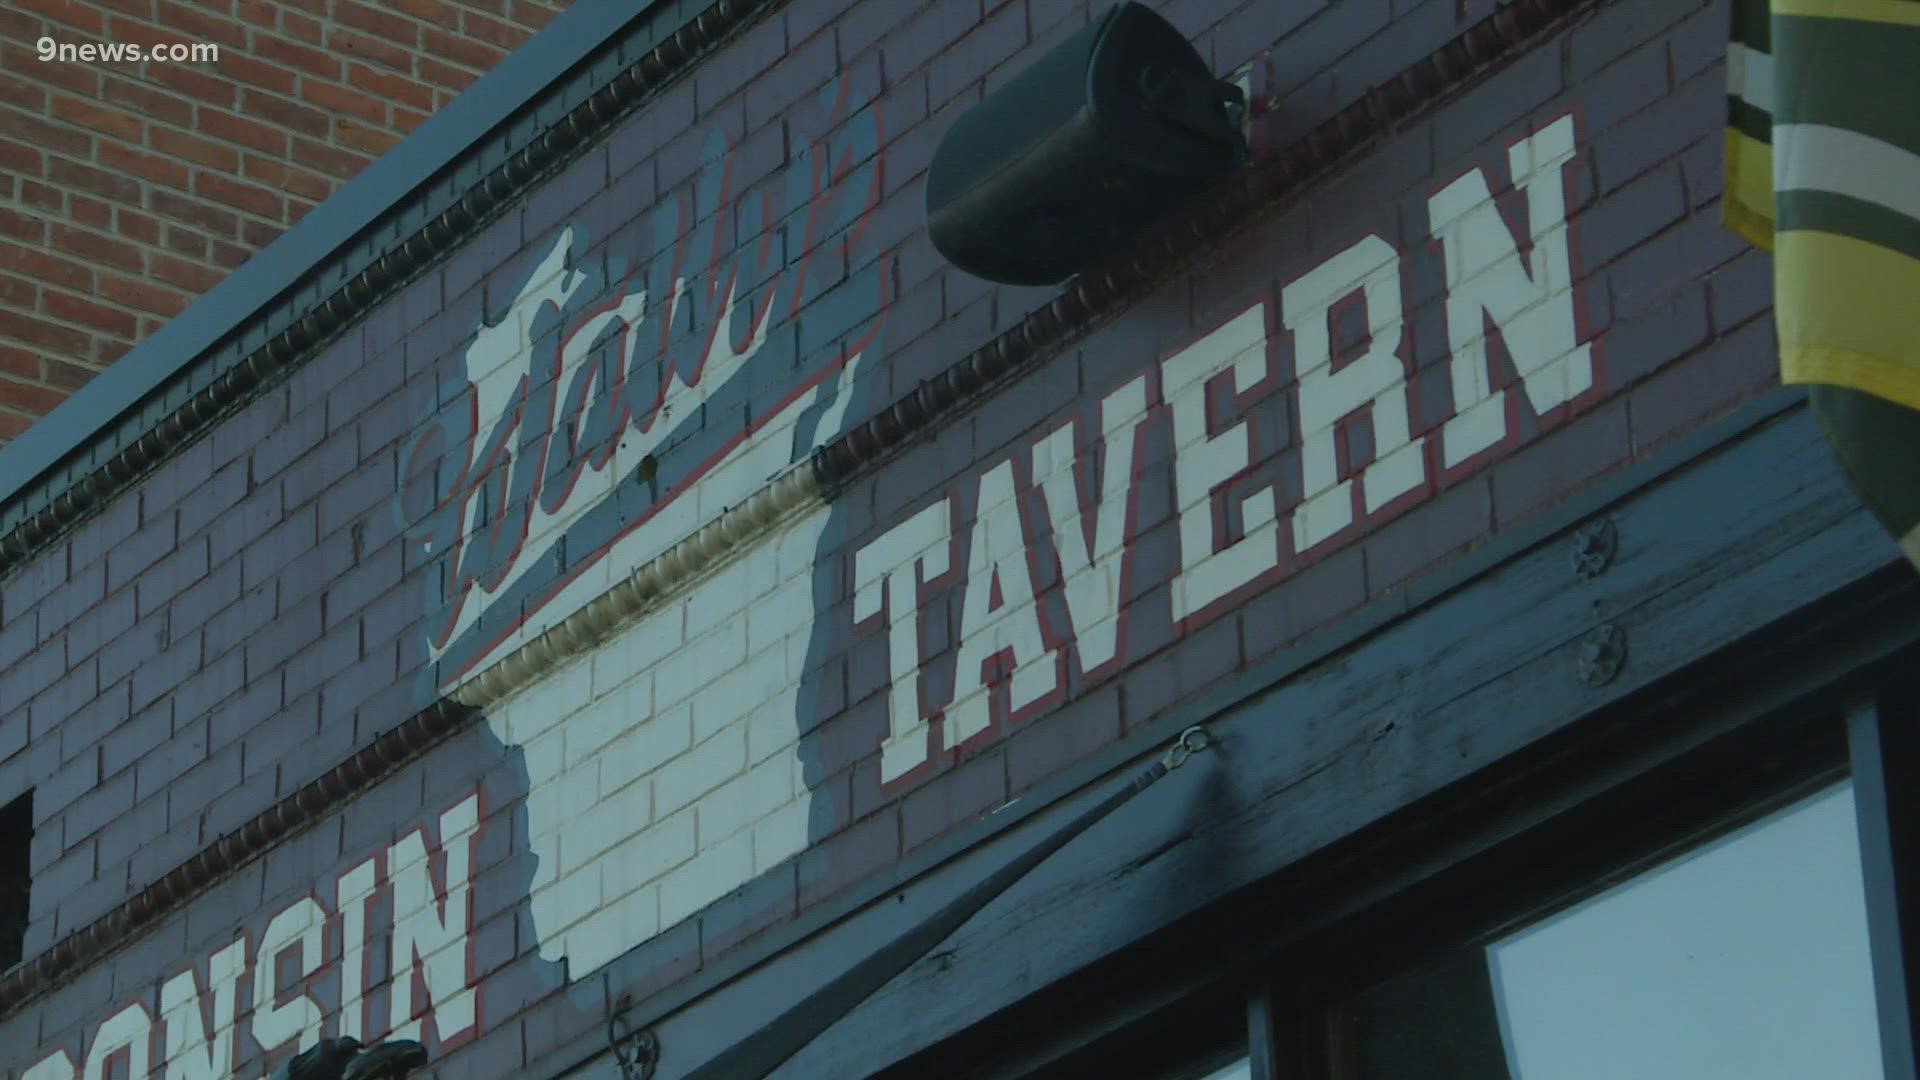 The owner of Wally's Wisconsin Tavern on Market Street said he wanted to give Coloradans a way to help.